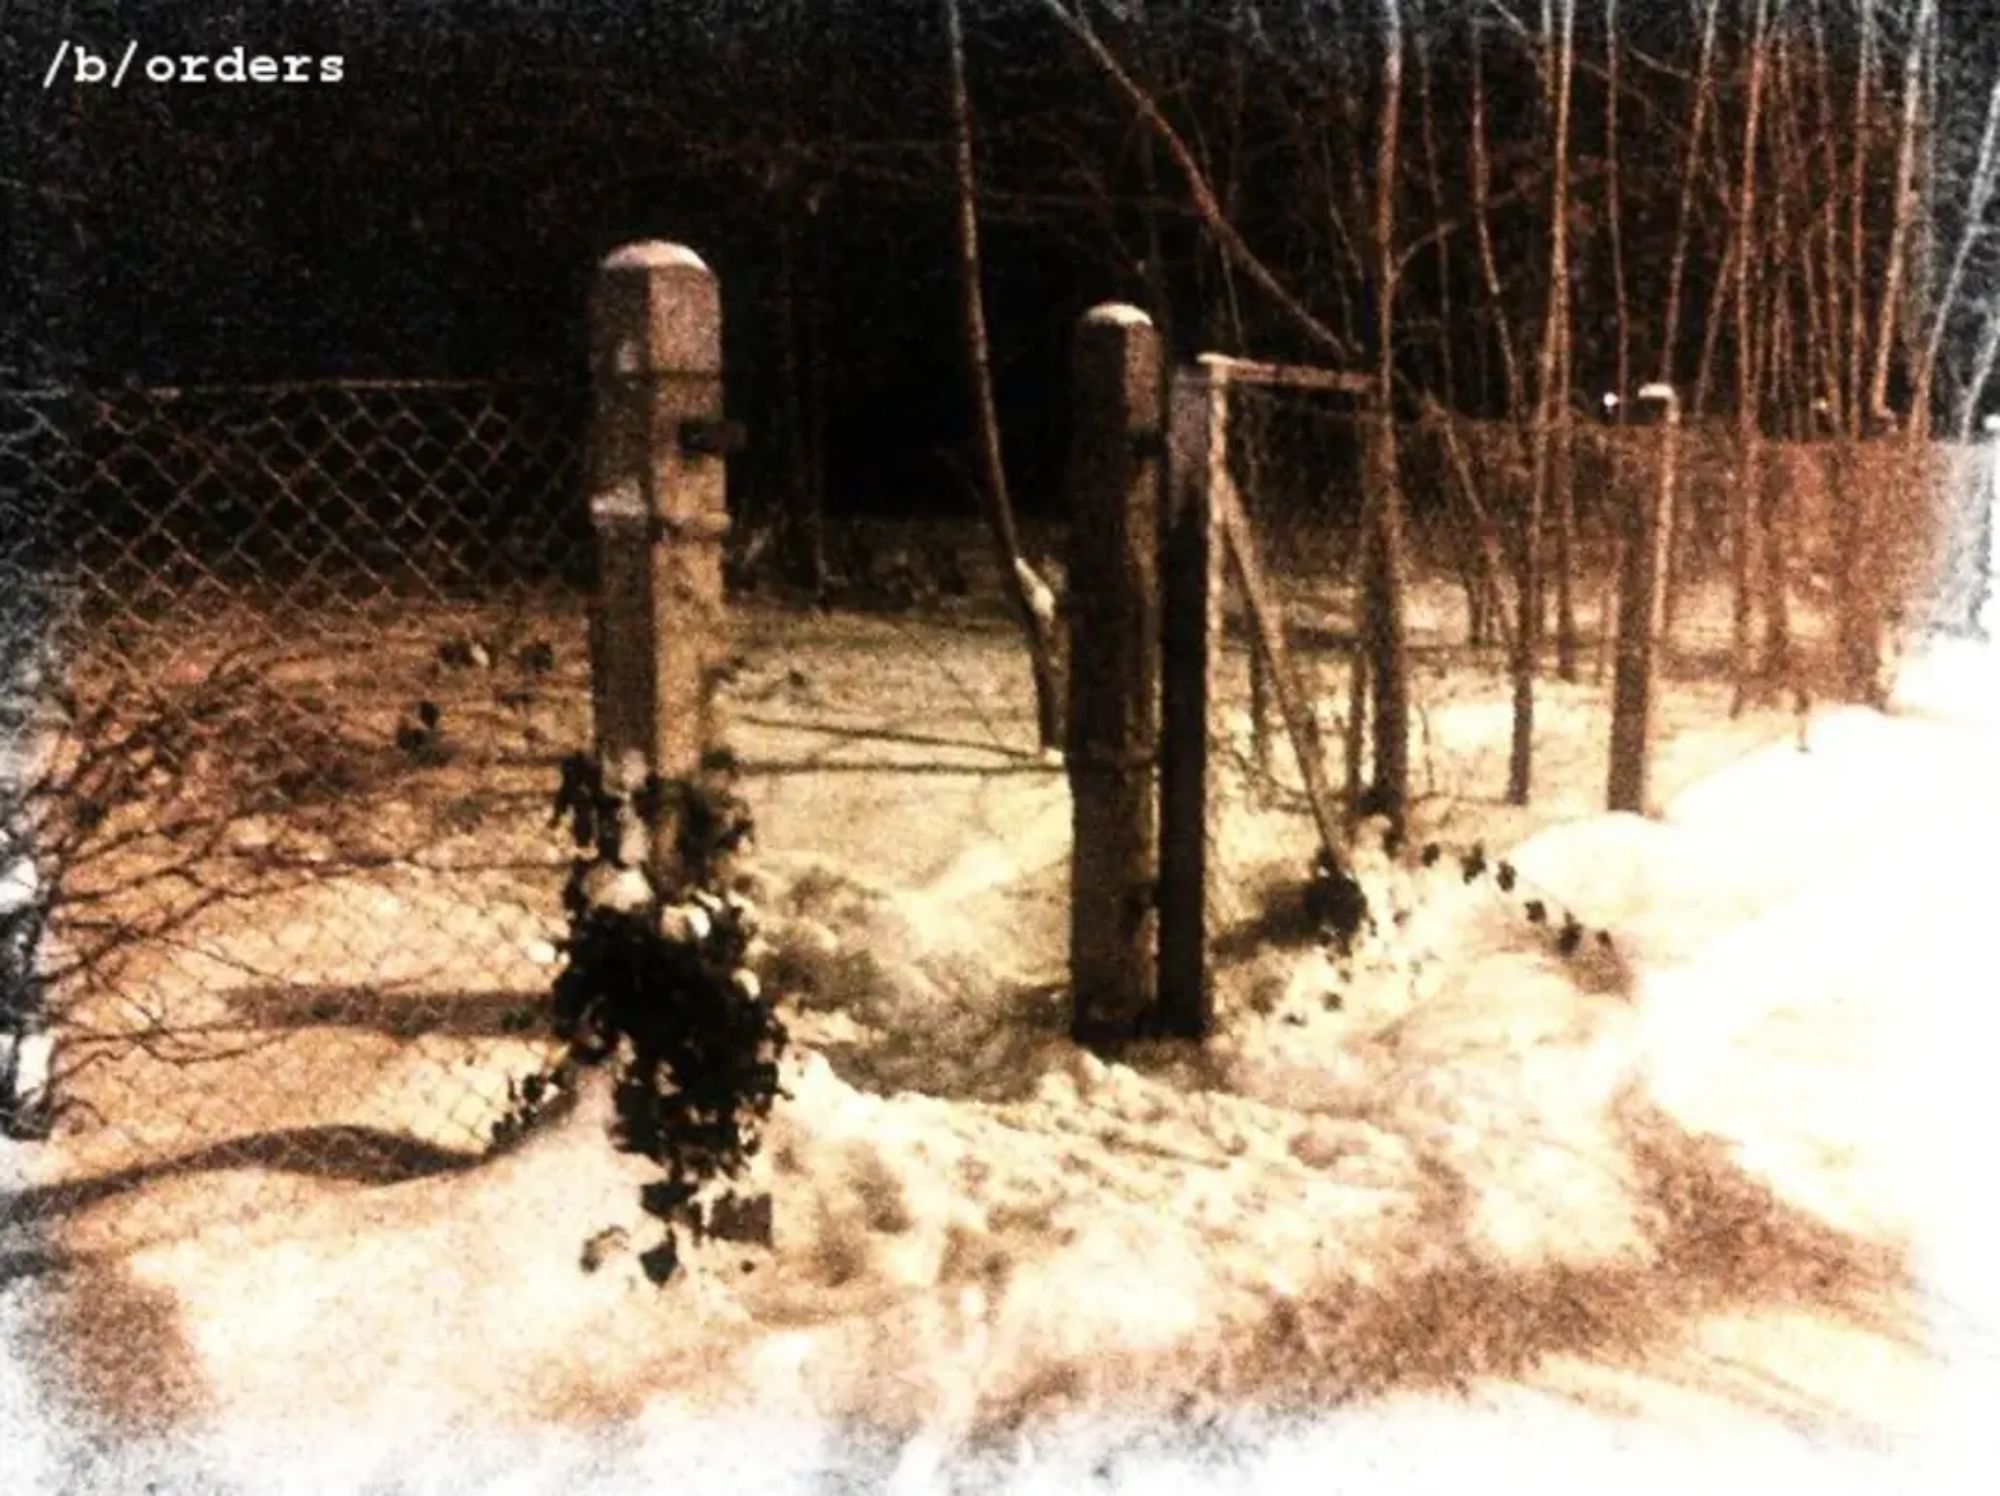 Deep snow, a wire fence and an abandoned gate right through.